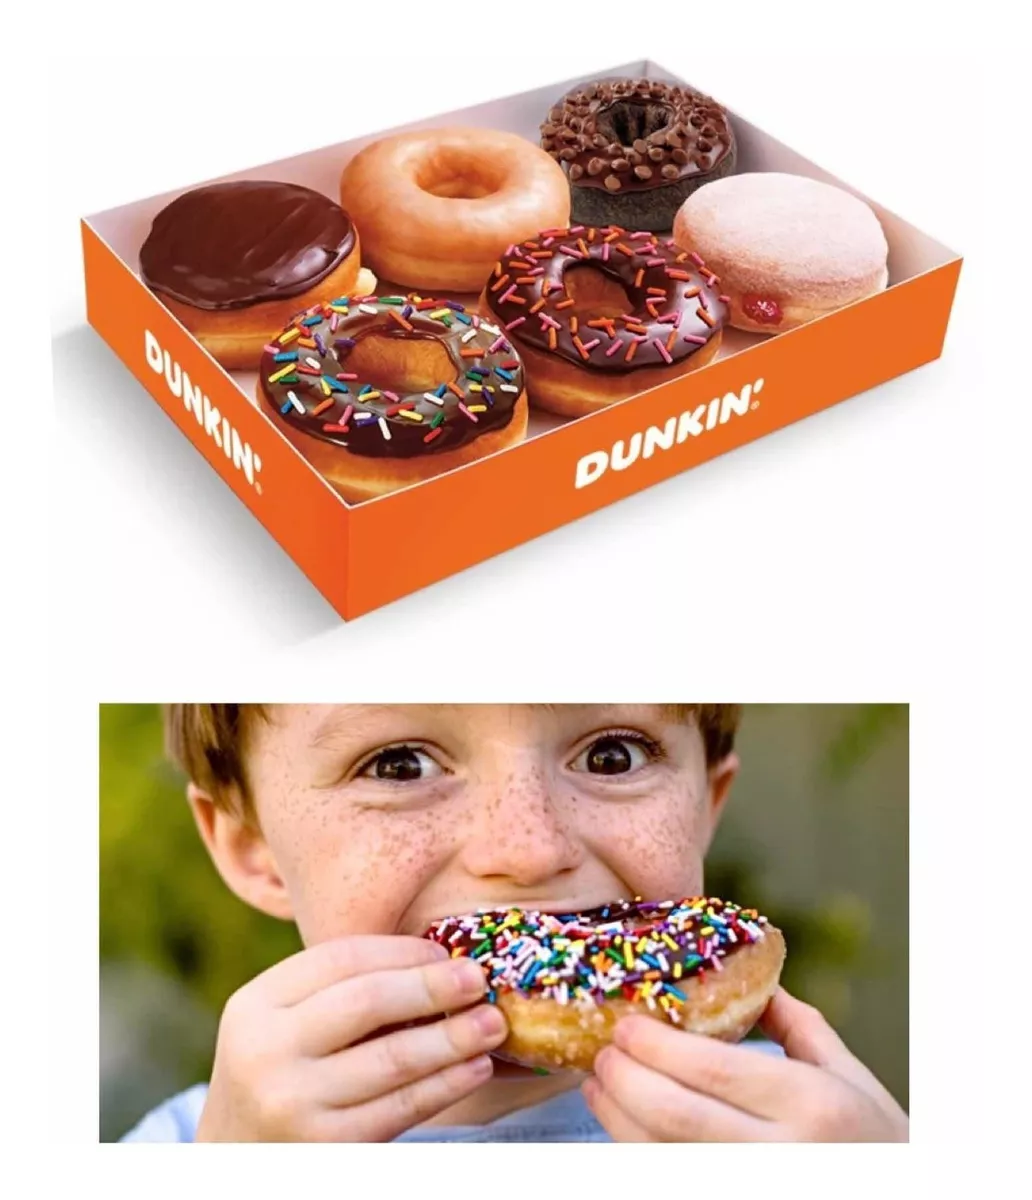 Dunkin Donuts X 6, Donas, Rosquillas - kg a $150